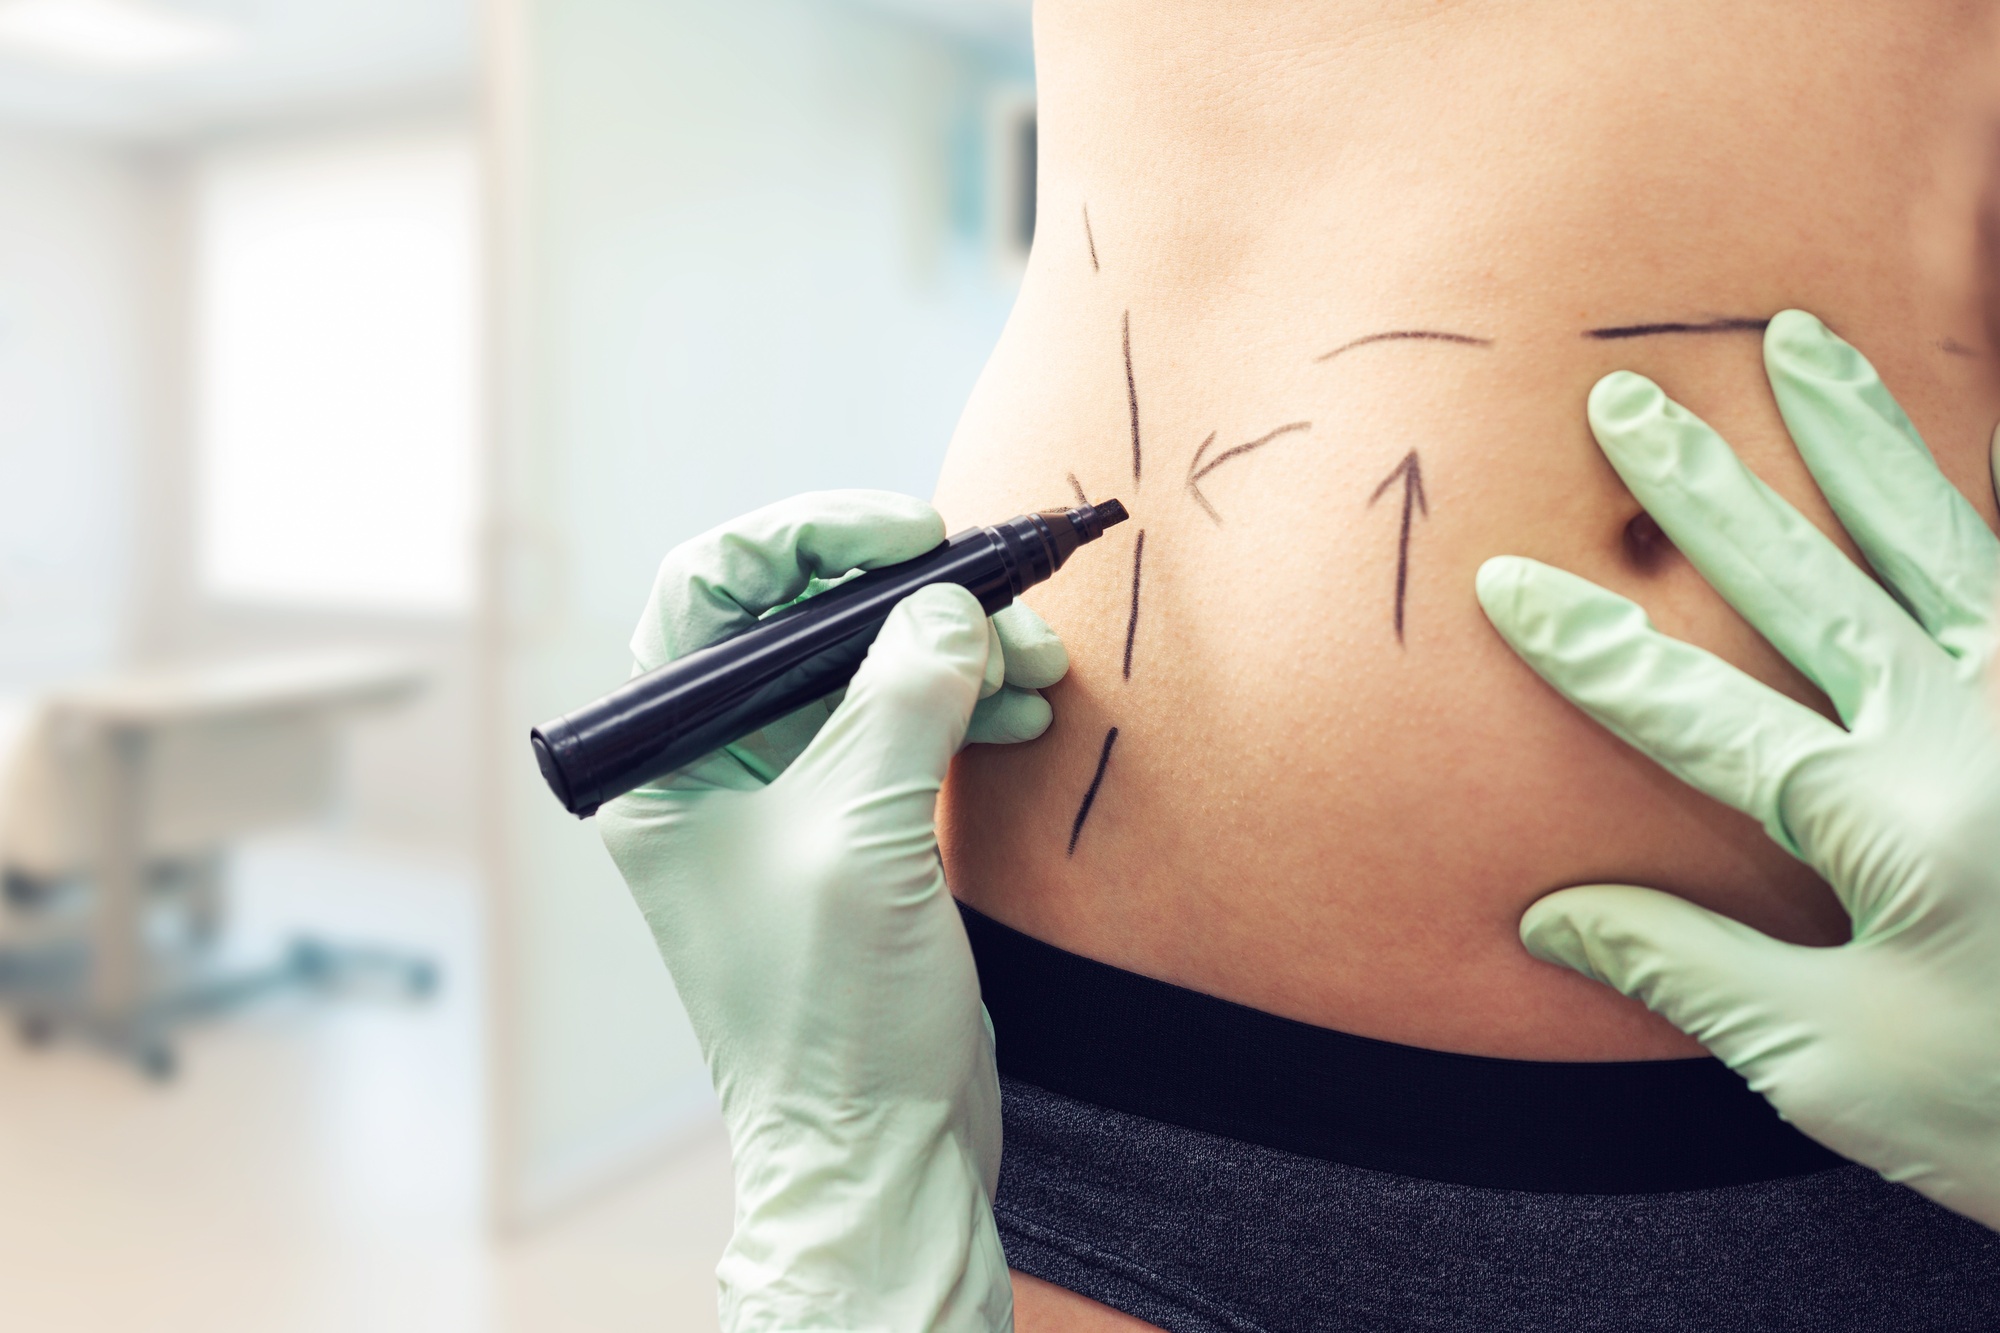 Top Cosmetic Surgeries: 5 of the Most Popular Procedures